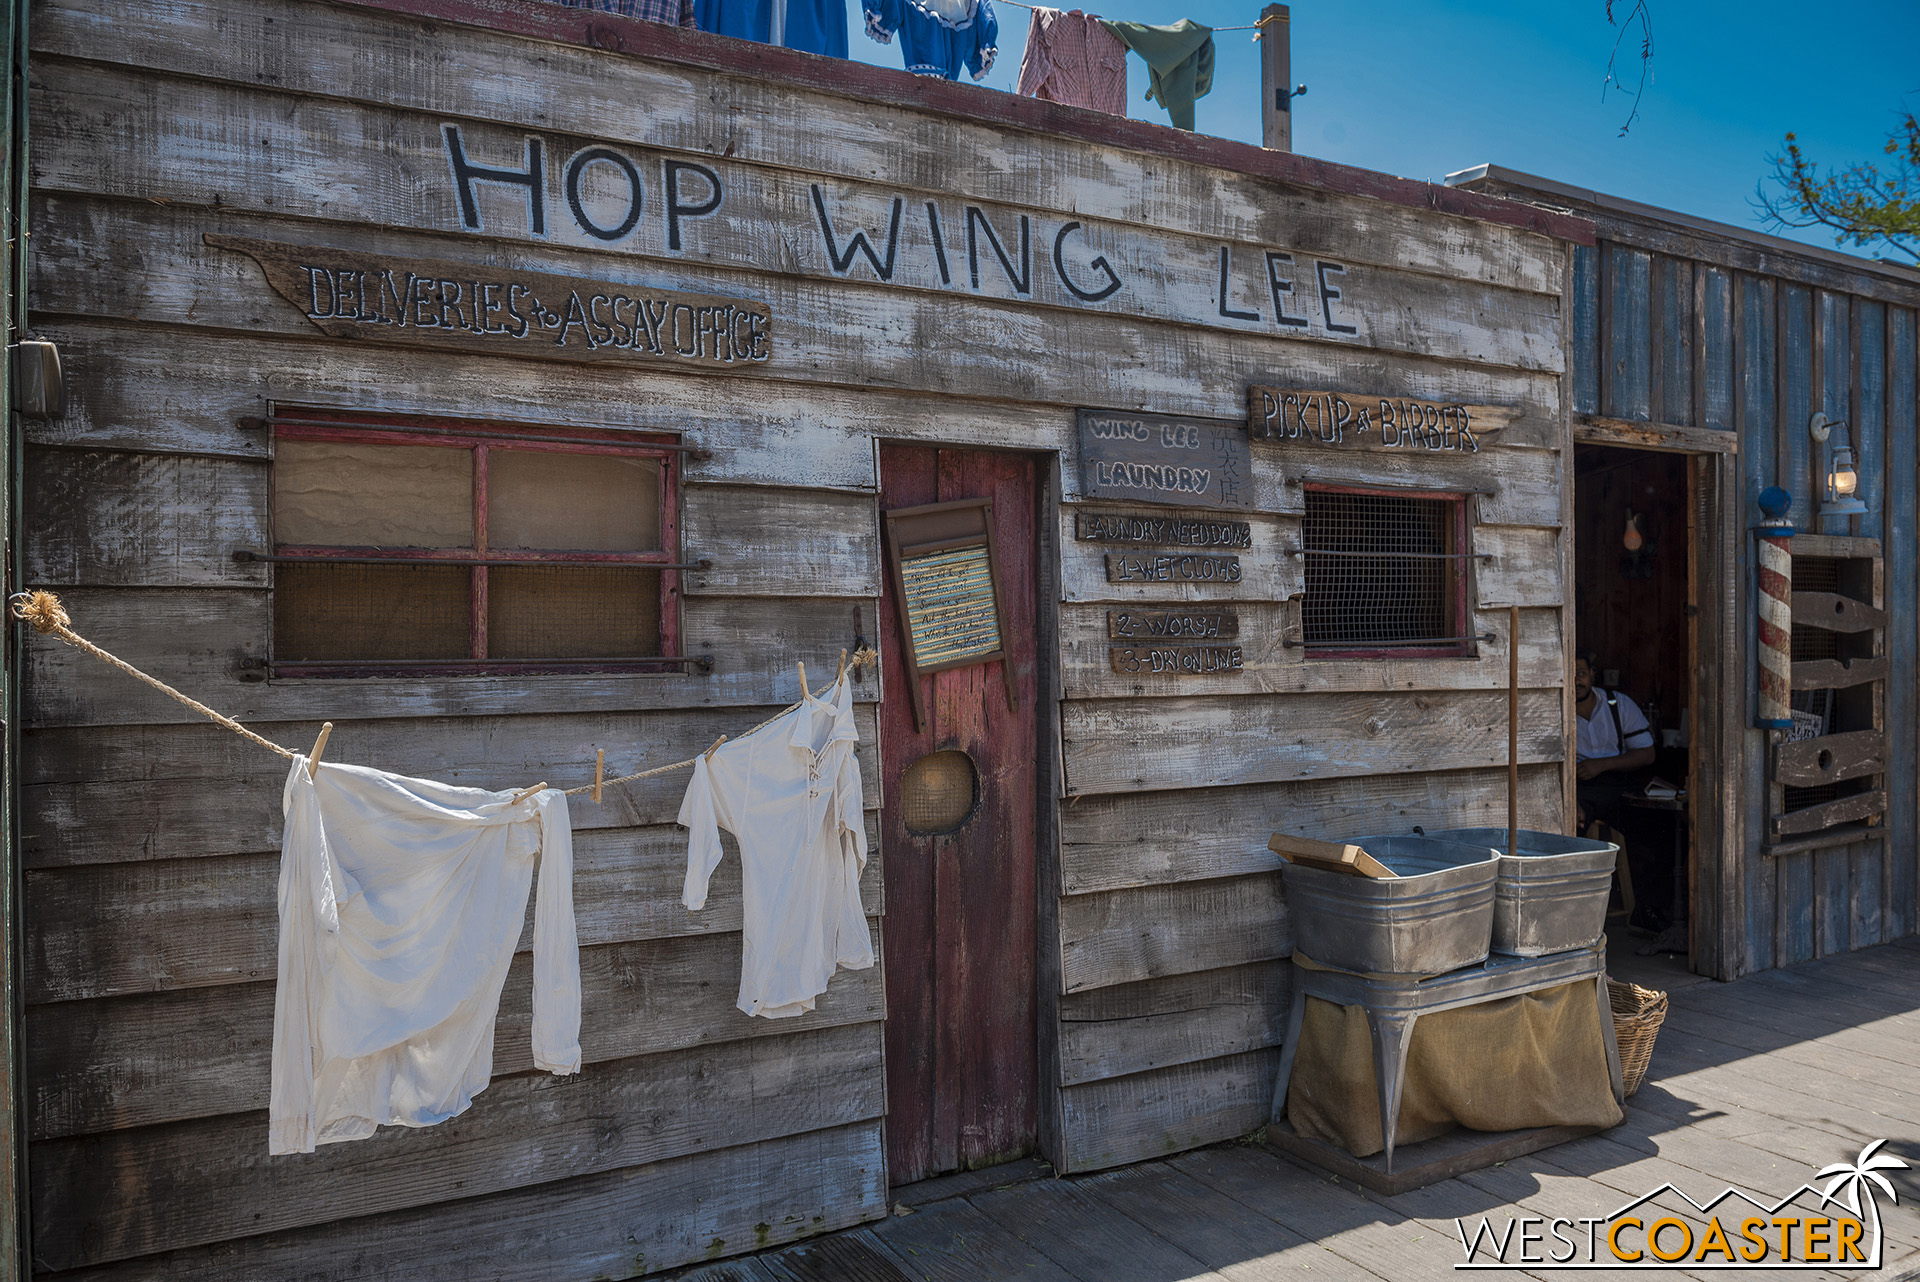  Except for Hop Wing Lee’s.  The town laundromat is once again closed despite the fortunes at the end of last season. 